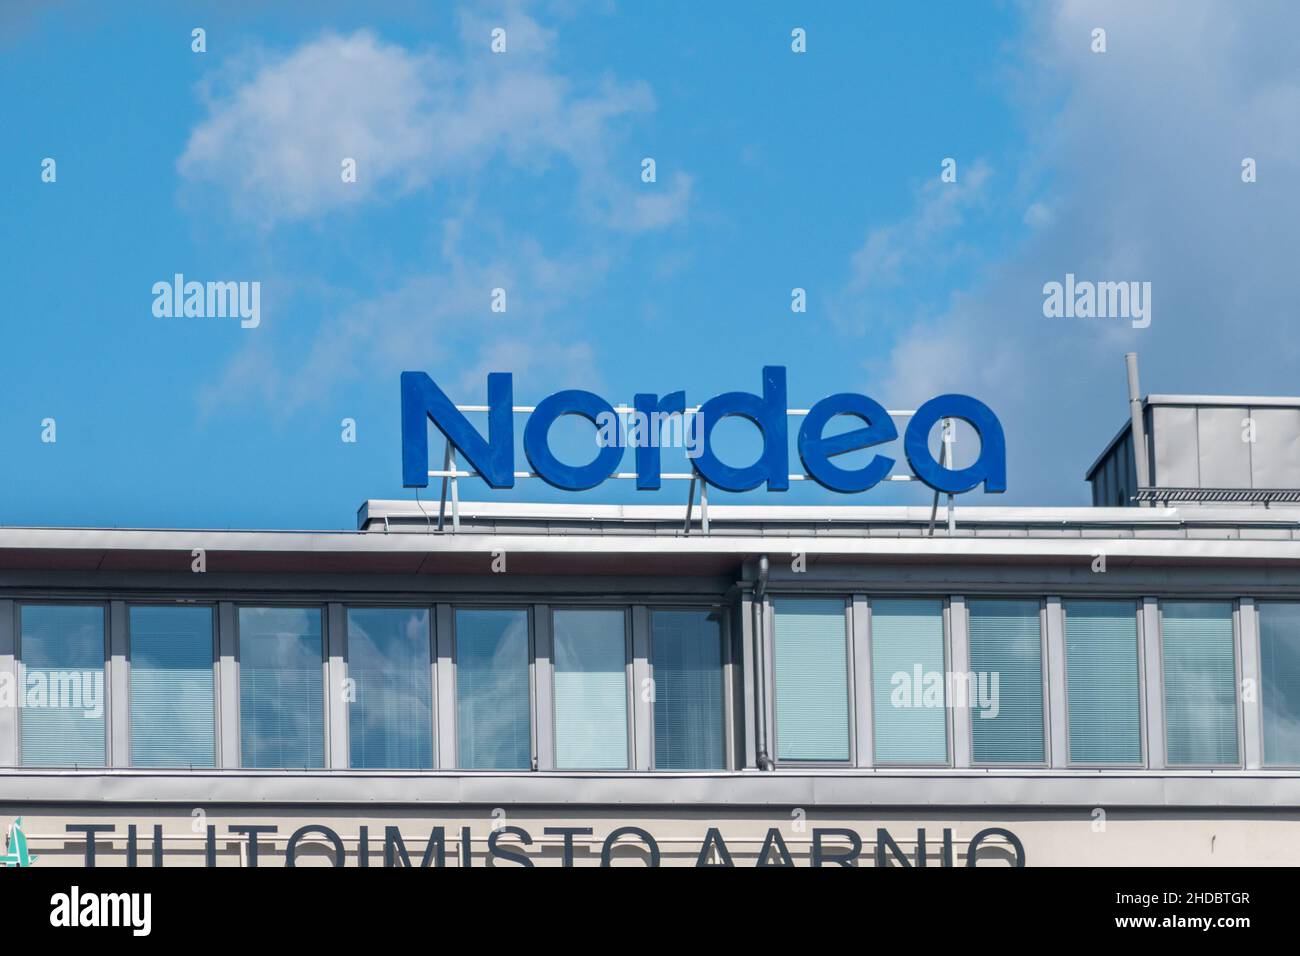 Turku, Finland - August 6, 2021: Logo of Nordea. It is part of Nordea - the largest financial group in the Nordic countries. Stock Photo